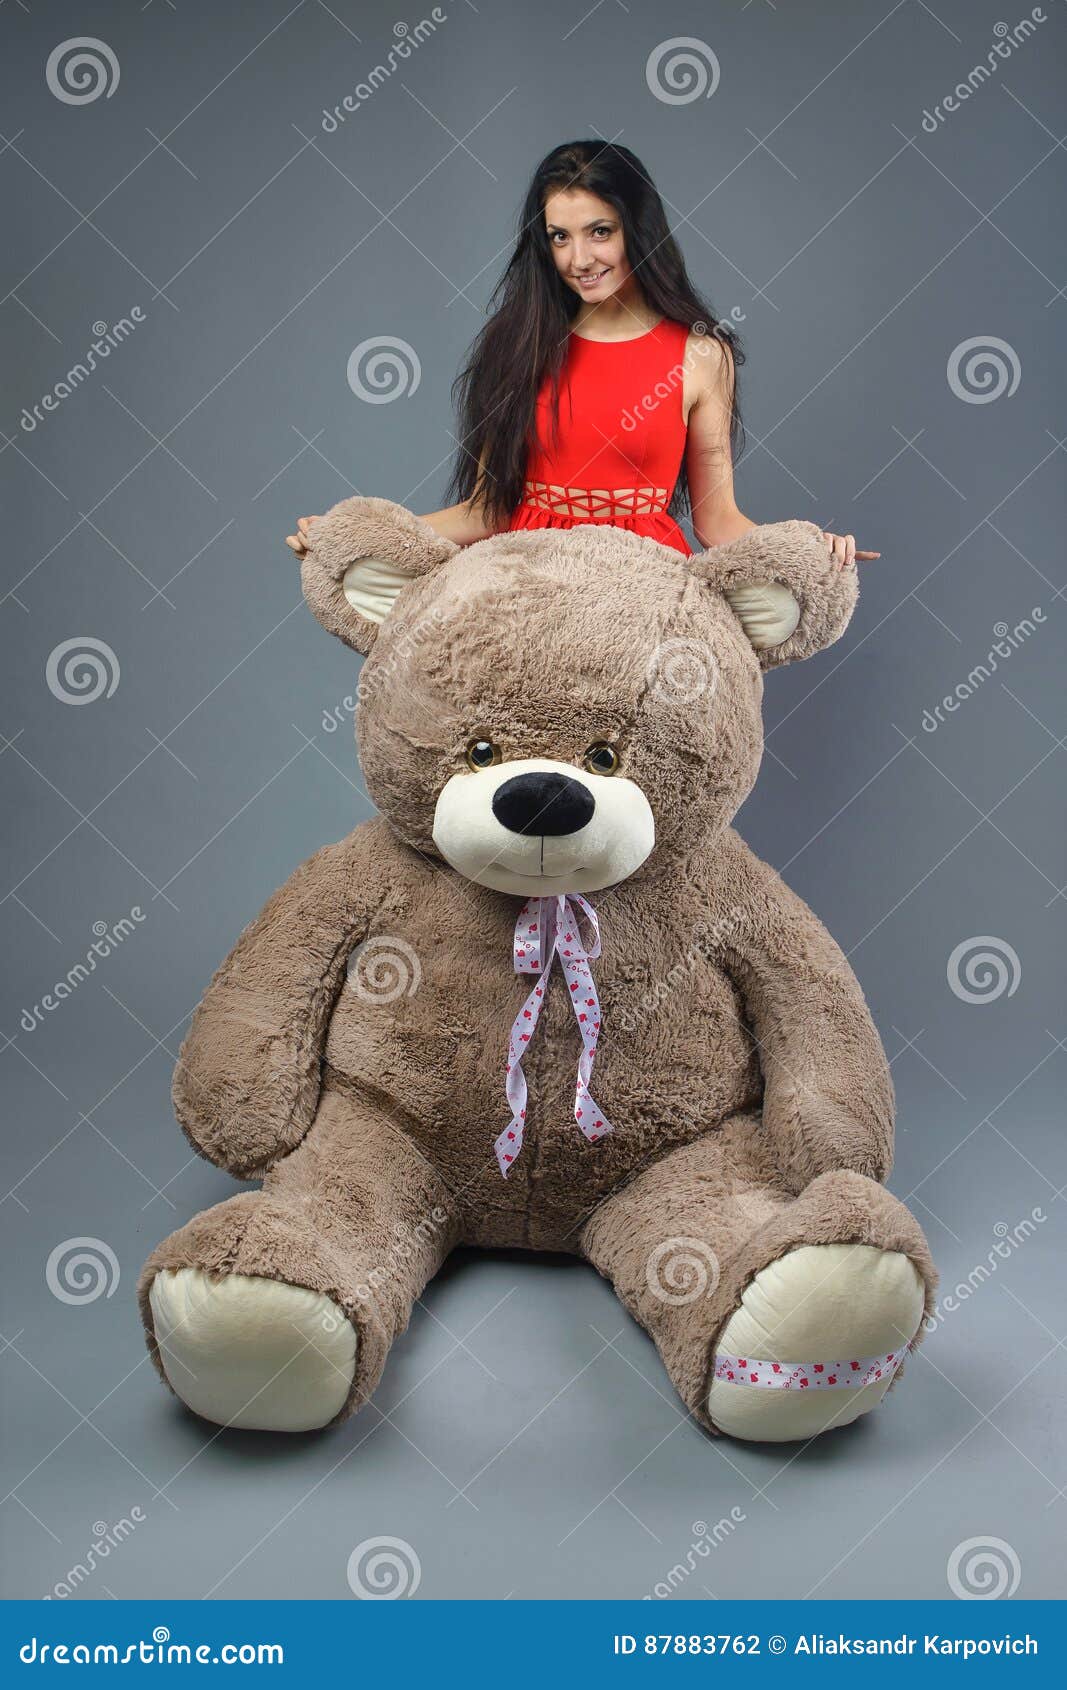 Young Beautiful Girl in Red Dress with Big Teddy Bear Soft Toy ...